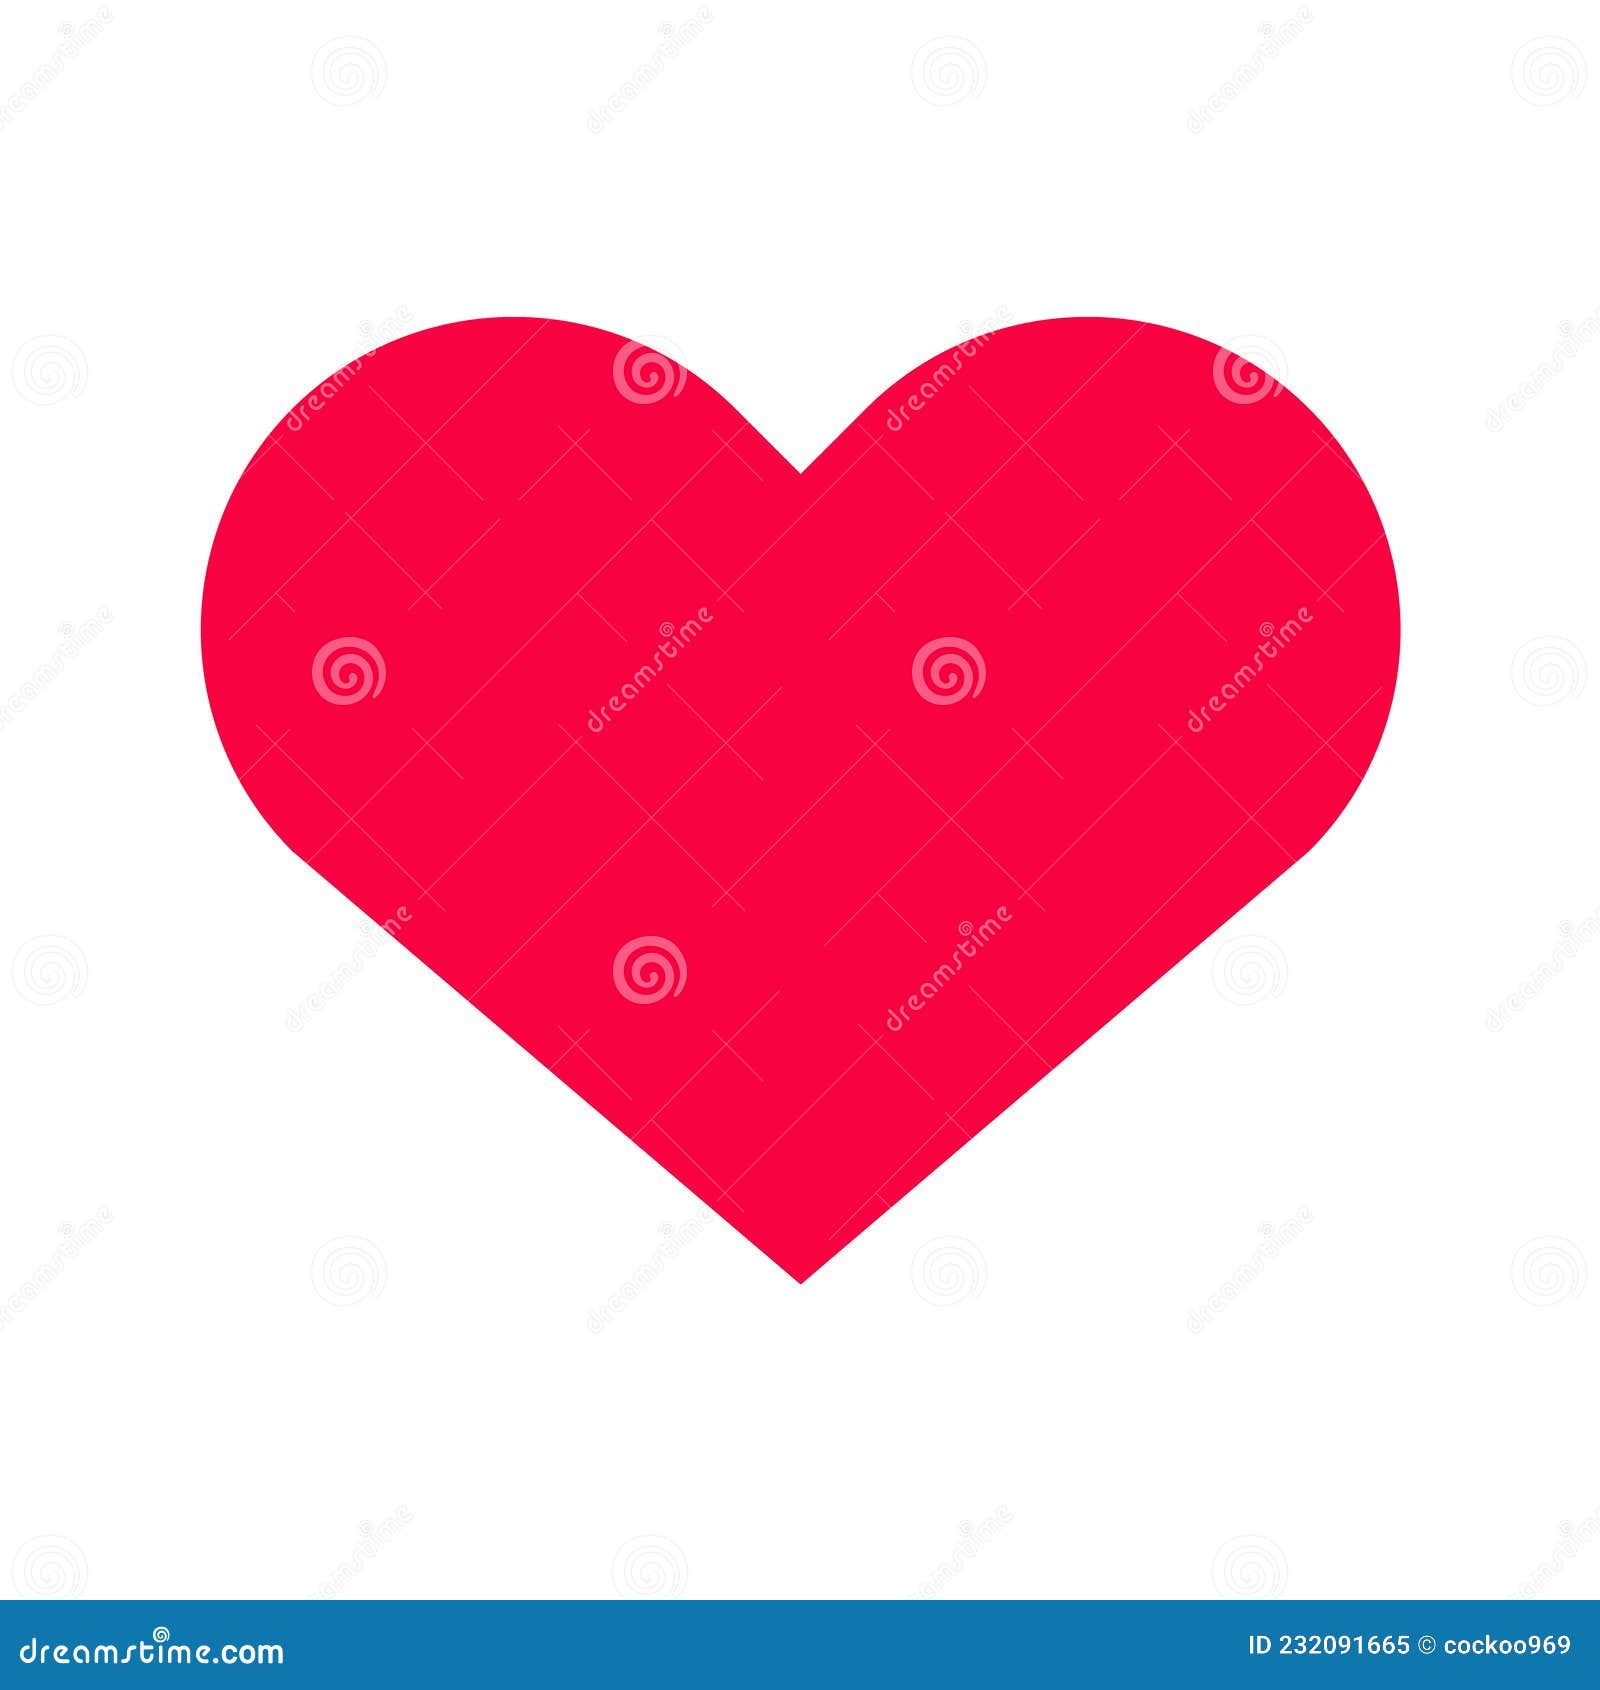 simple pink heart icon 